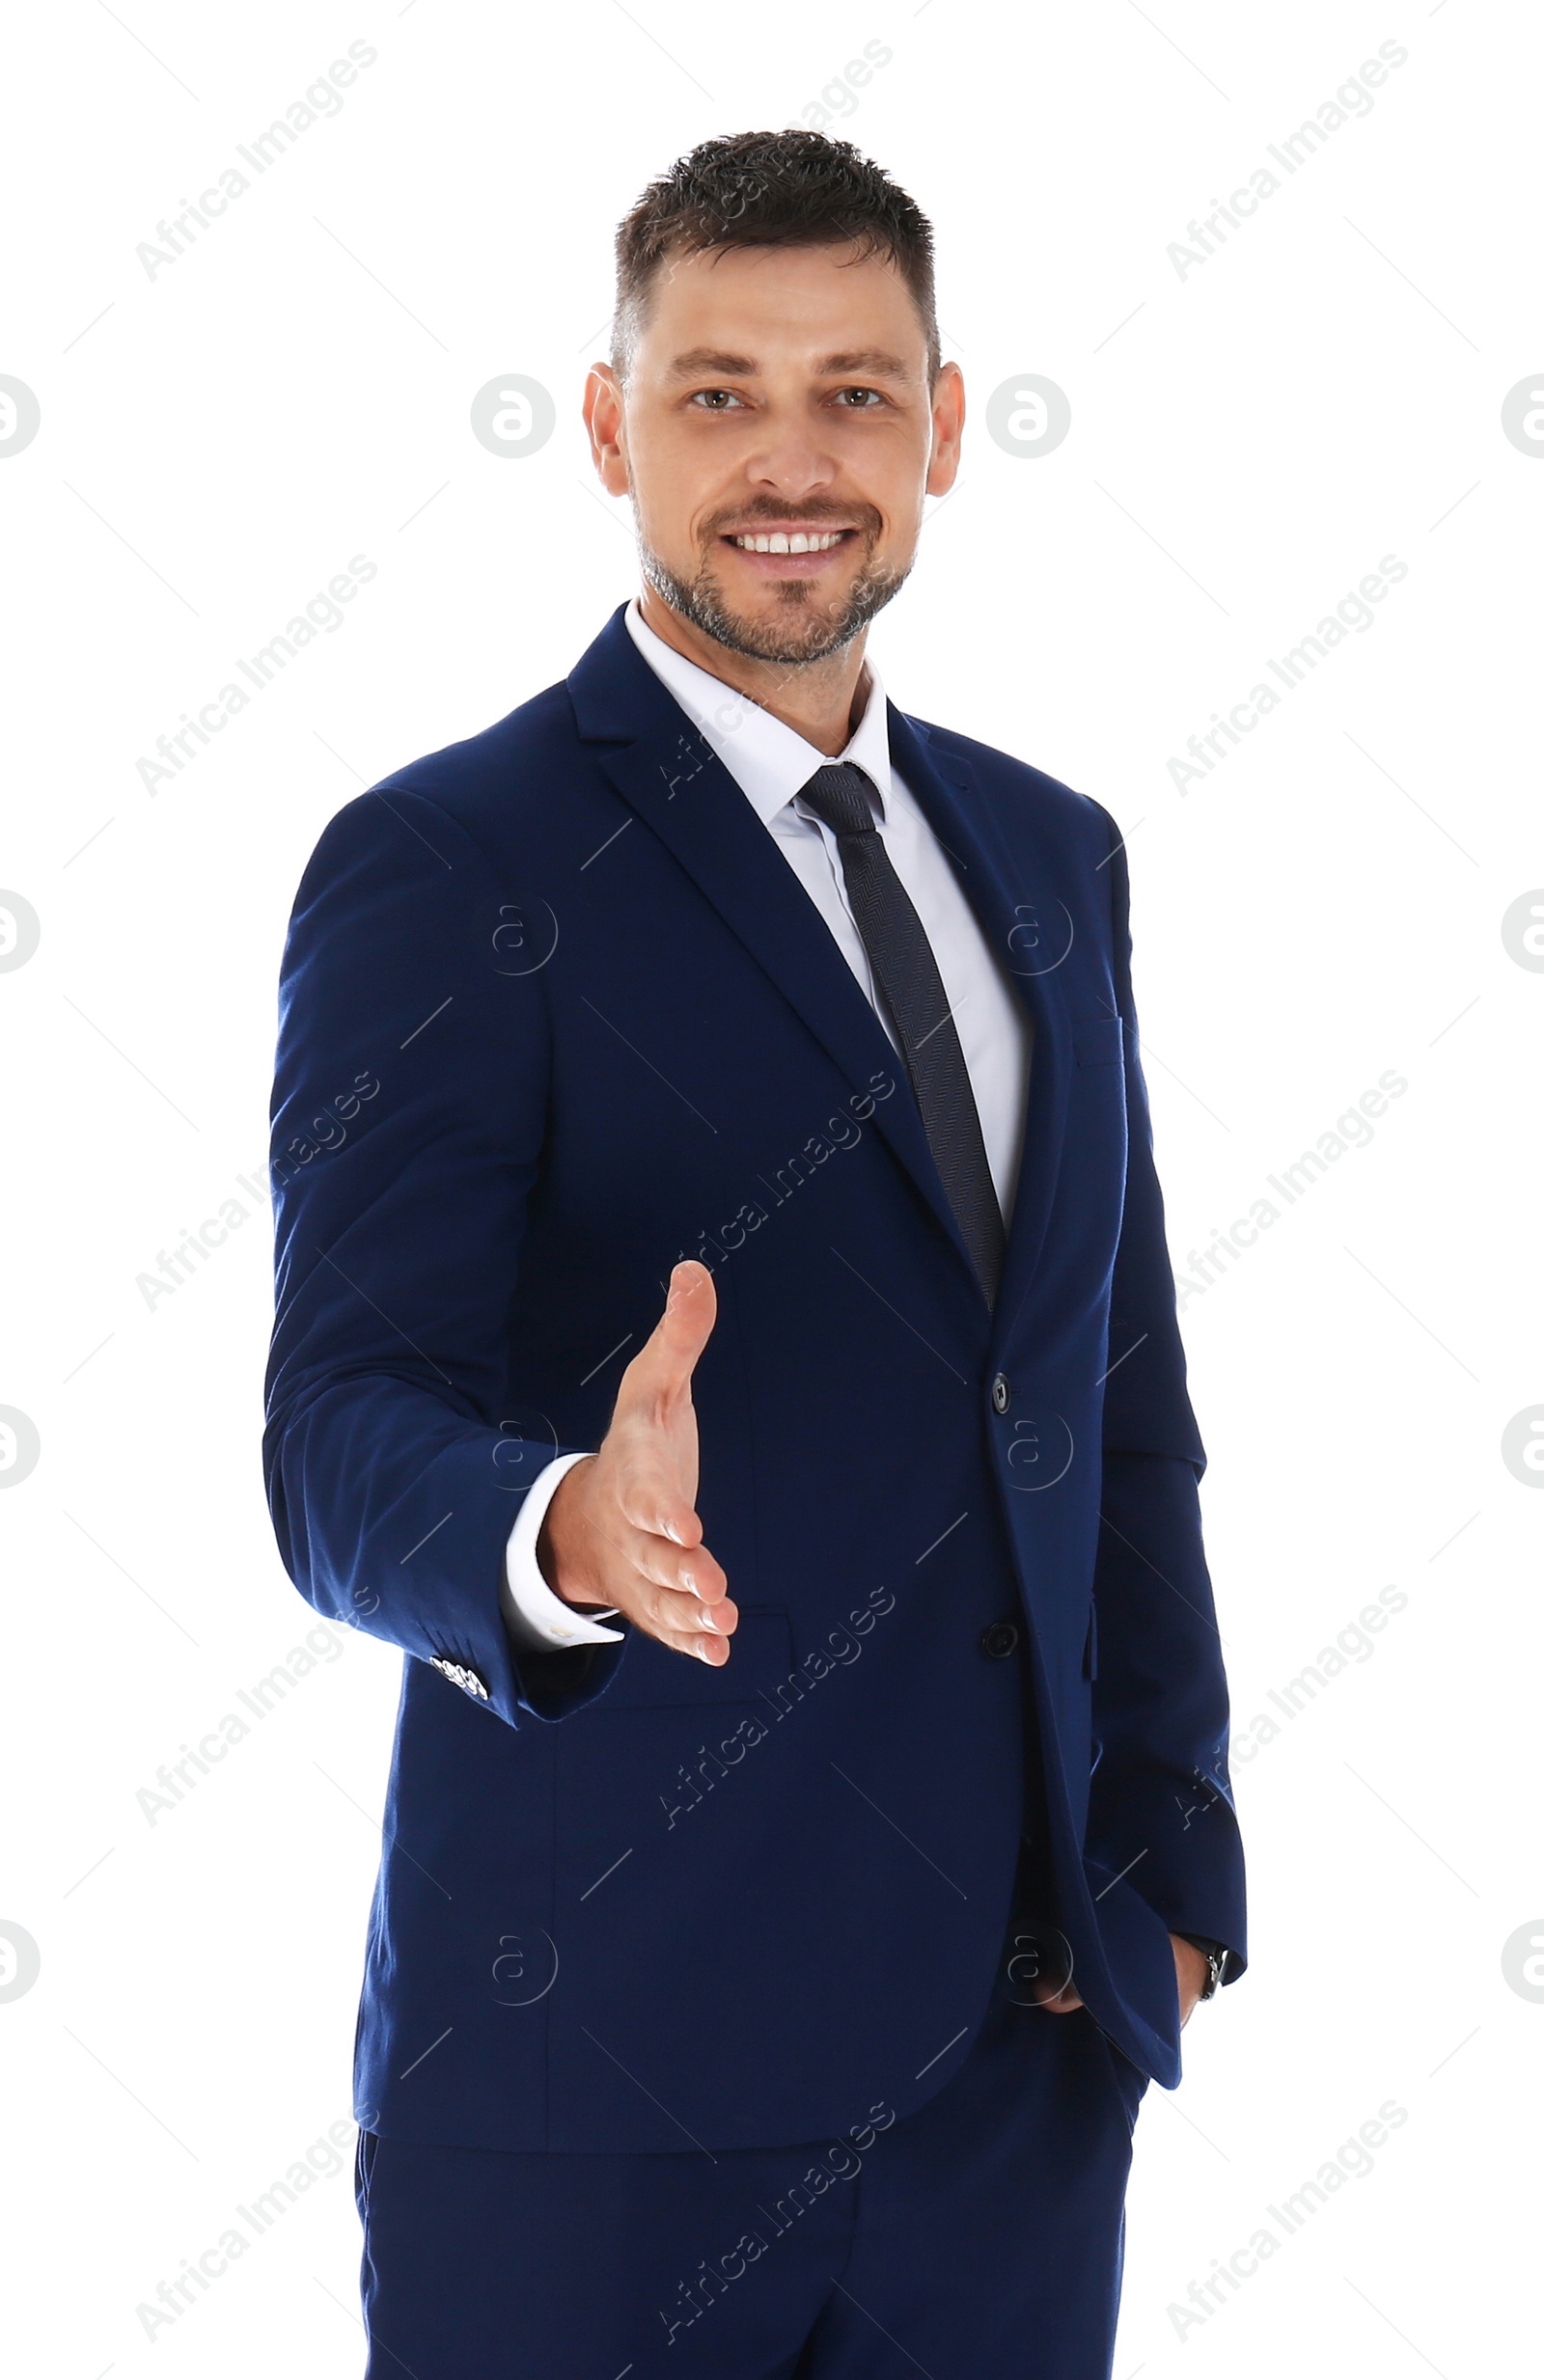 Photo of Professional business trainer reaching for handshake on white background